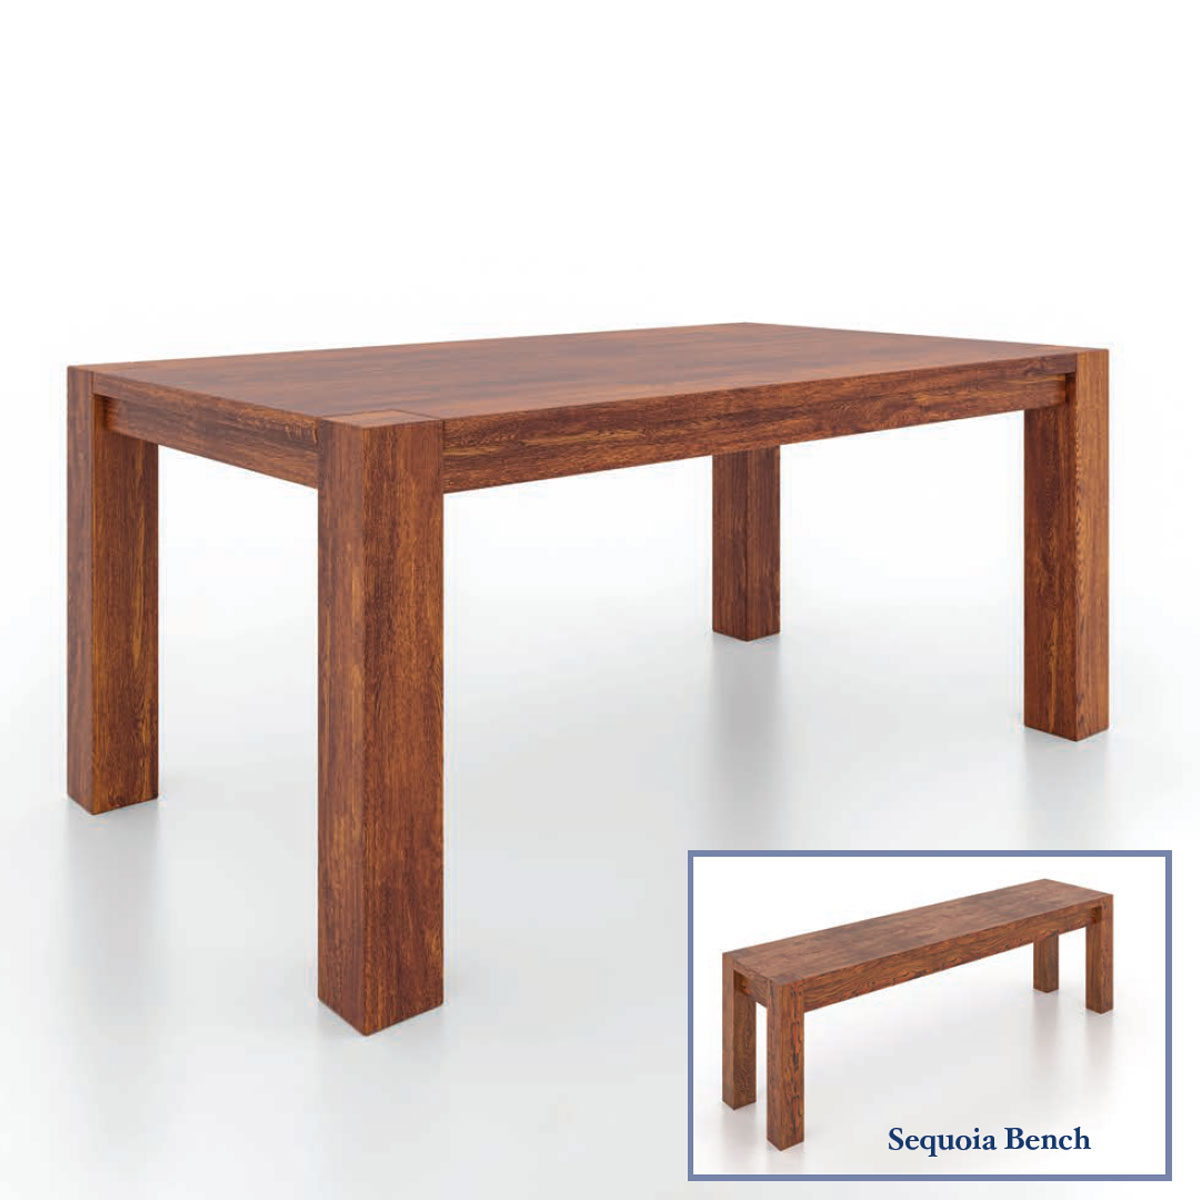 Sequoia Leg Table shown with the Sequoia Bench